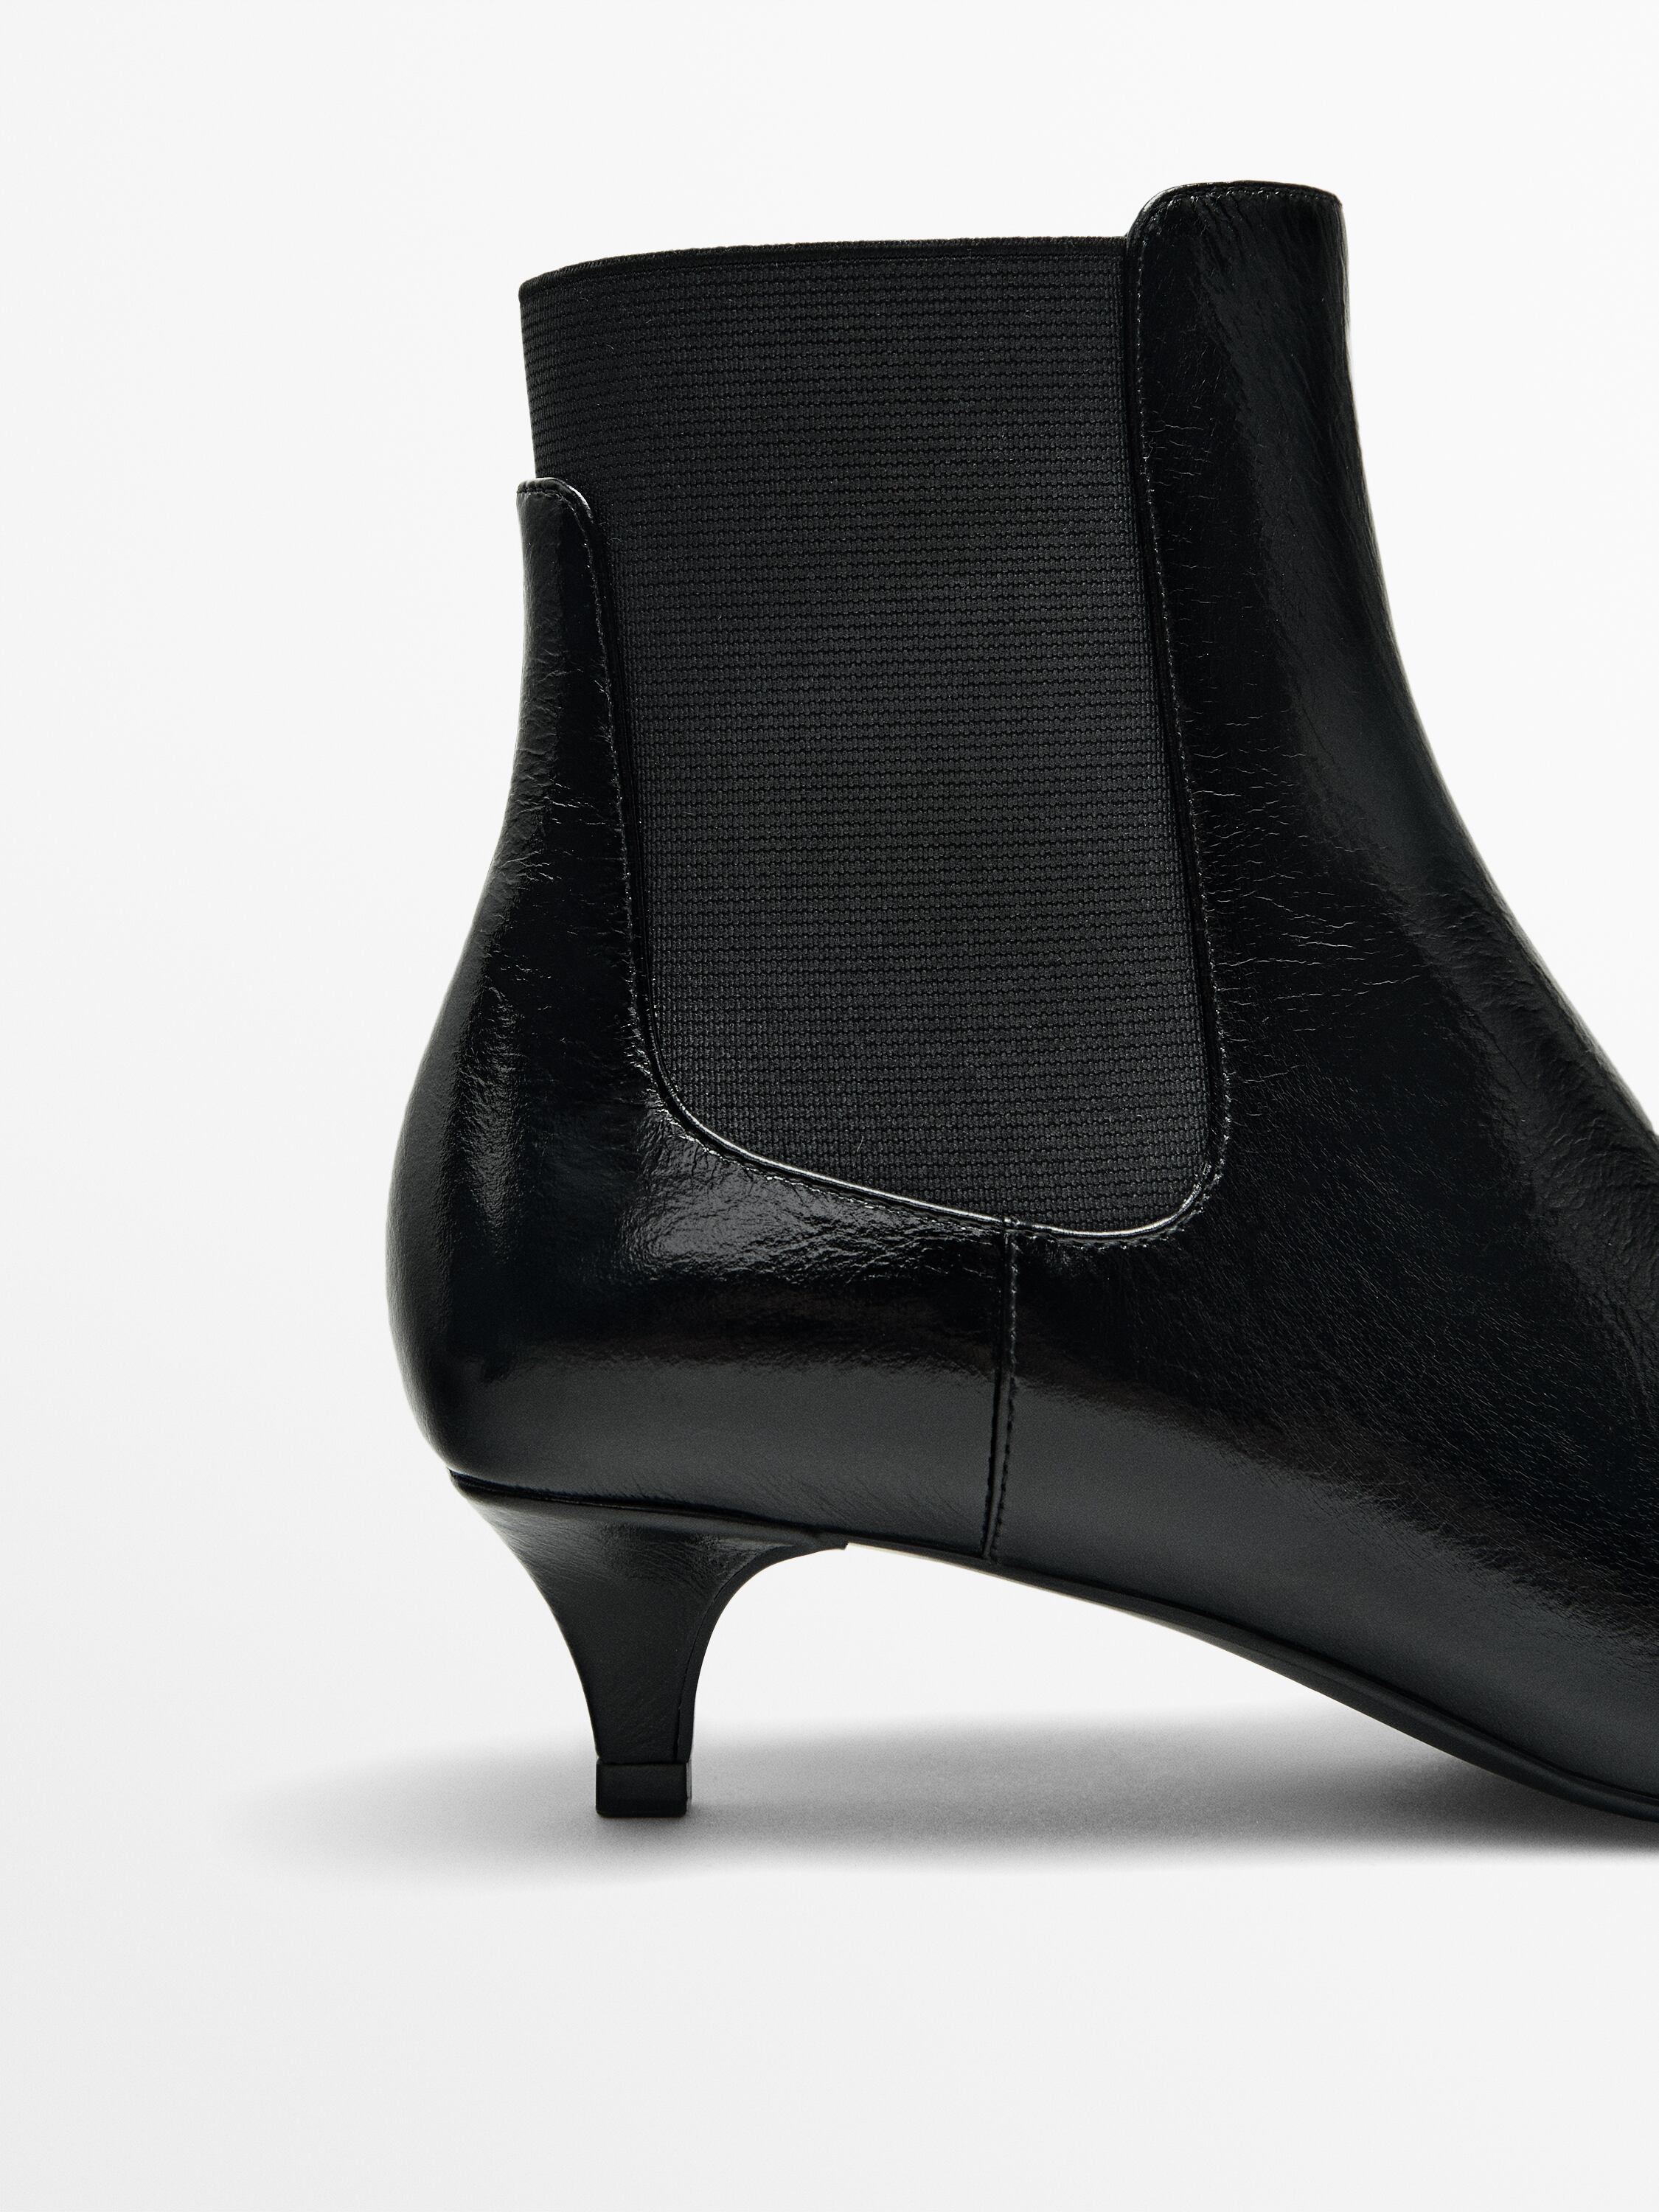 Low-heel ankle boots